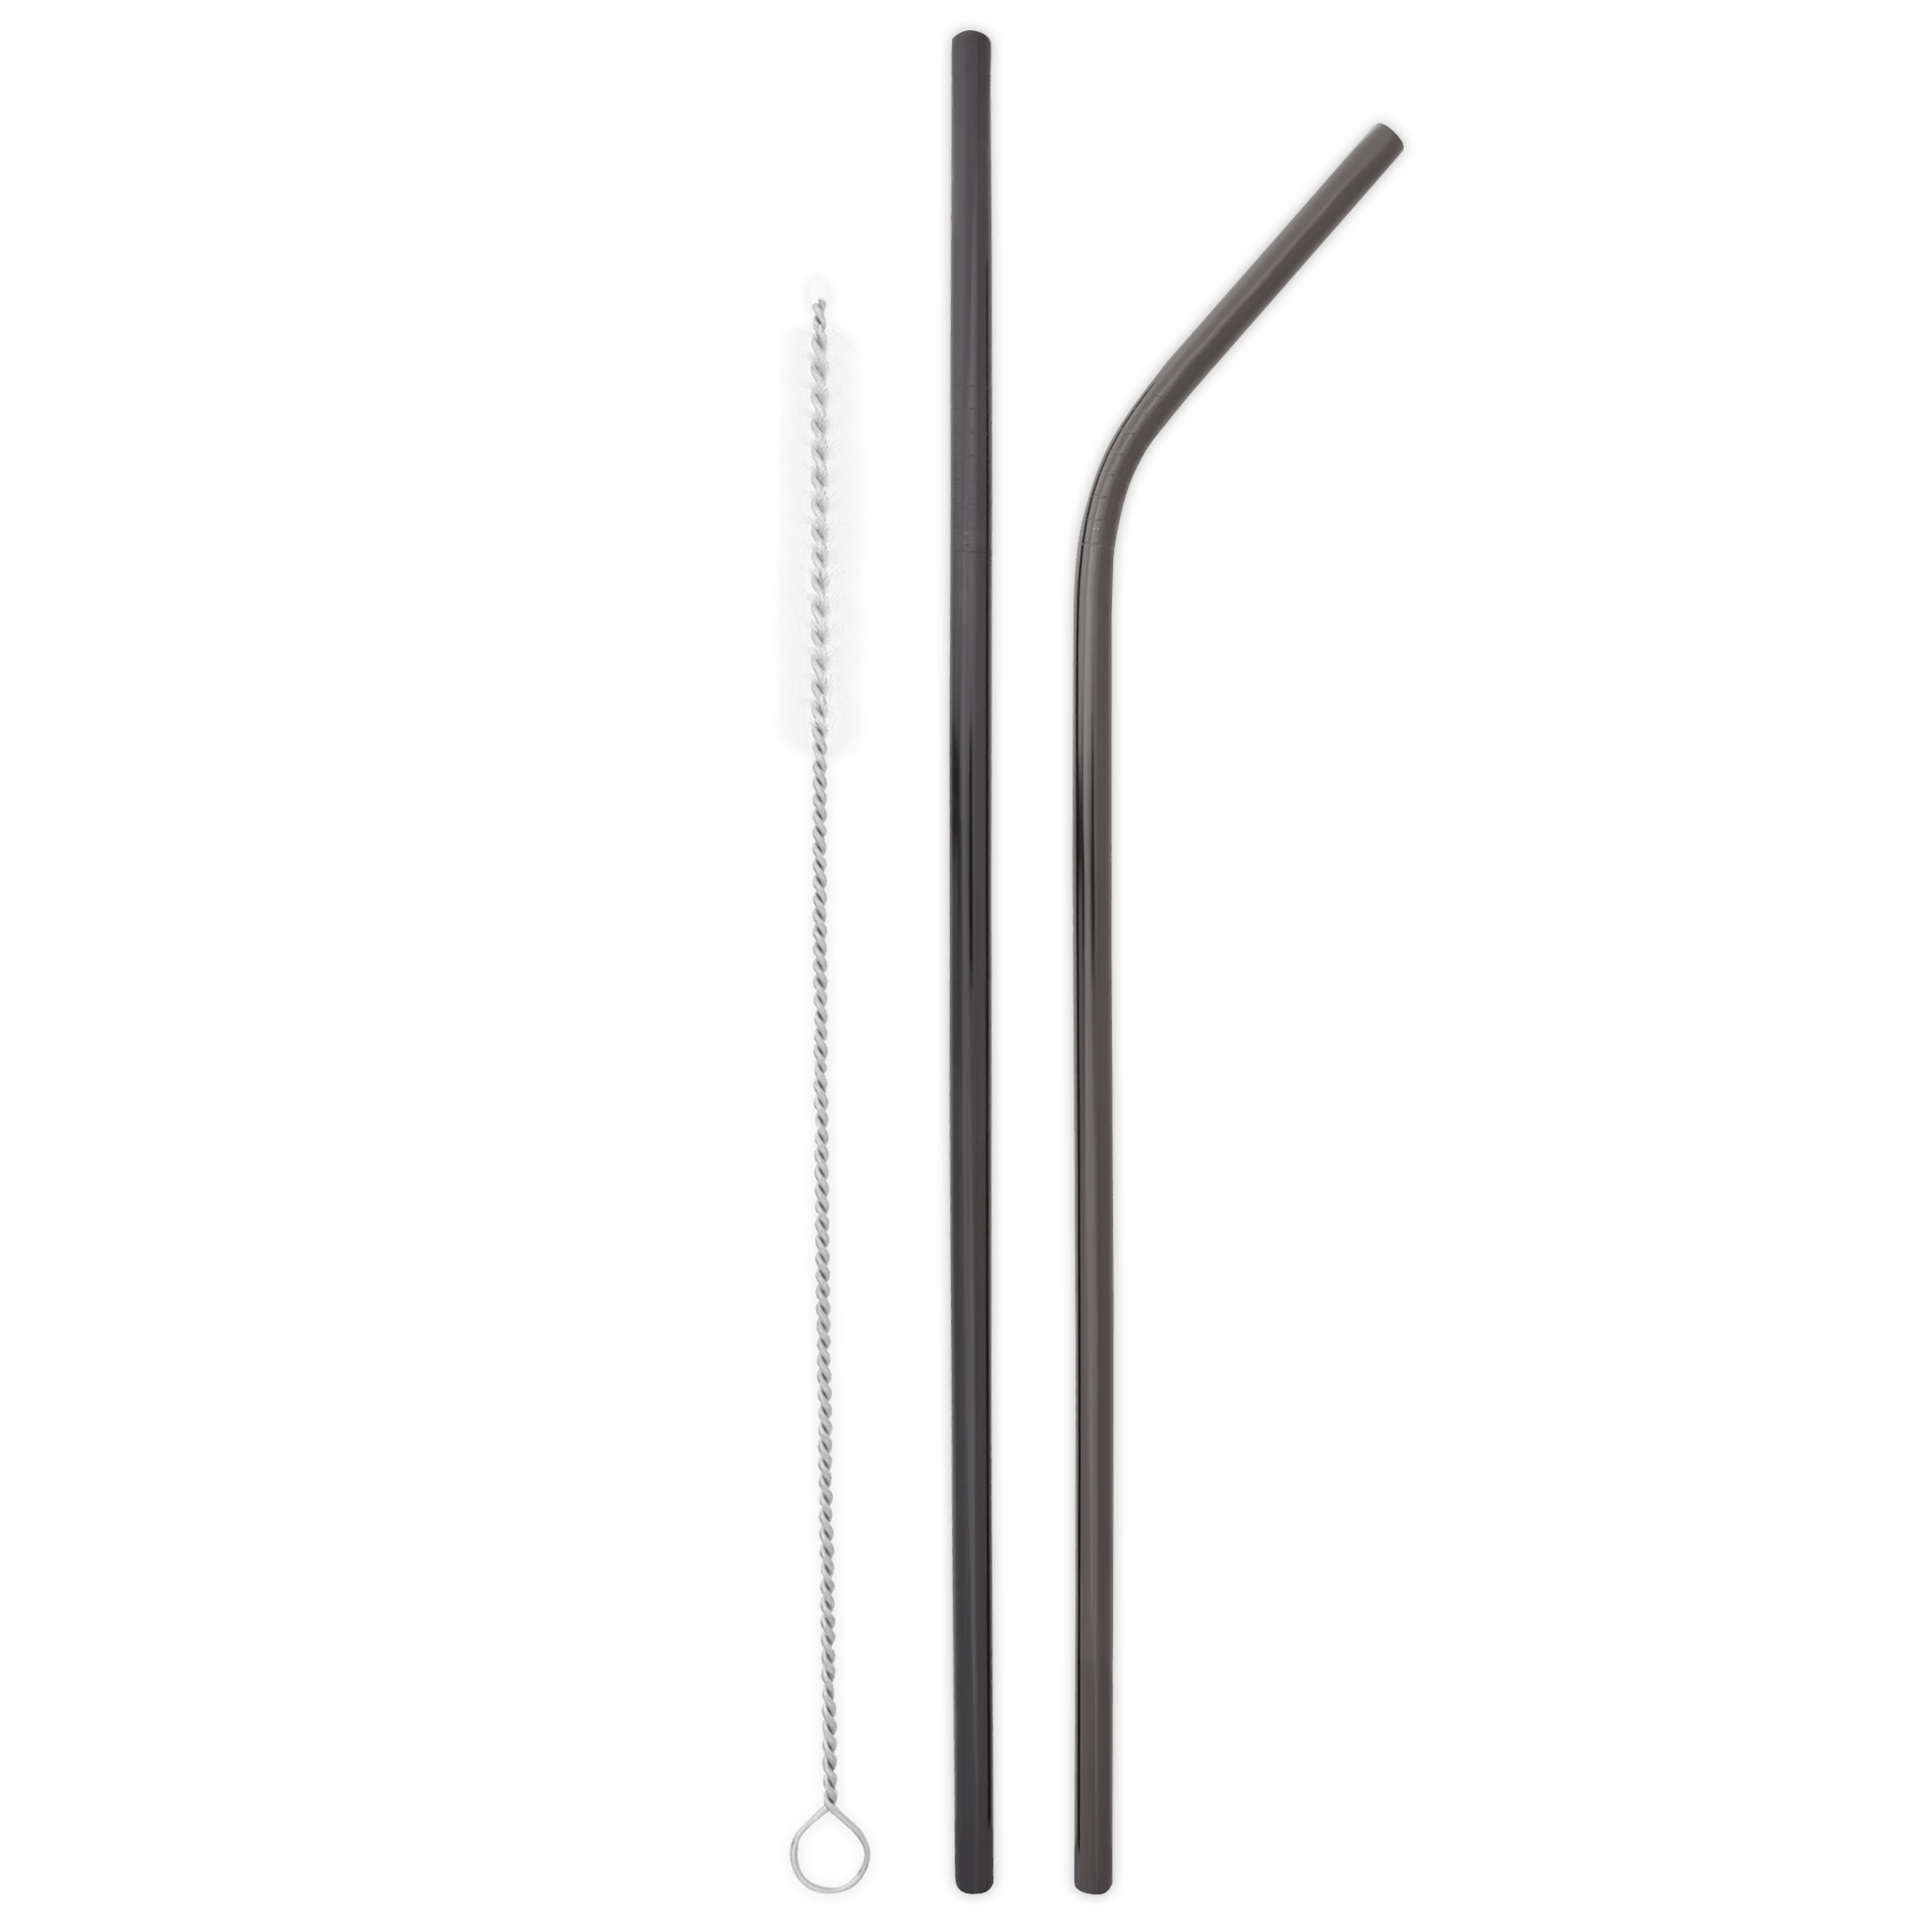 Long Double Trouble Stainless Steel Straw Set with Travel Pouch (Black)